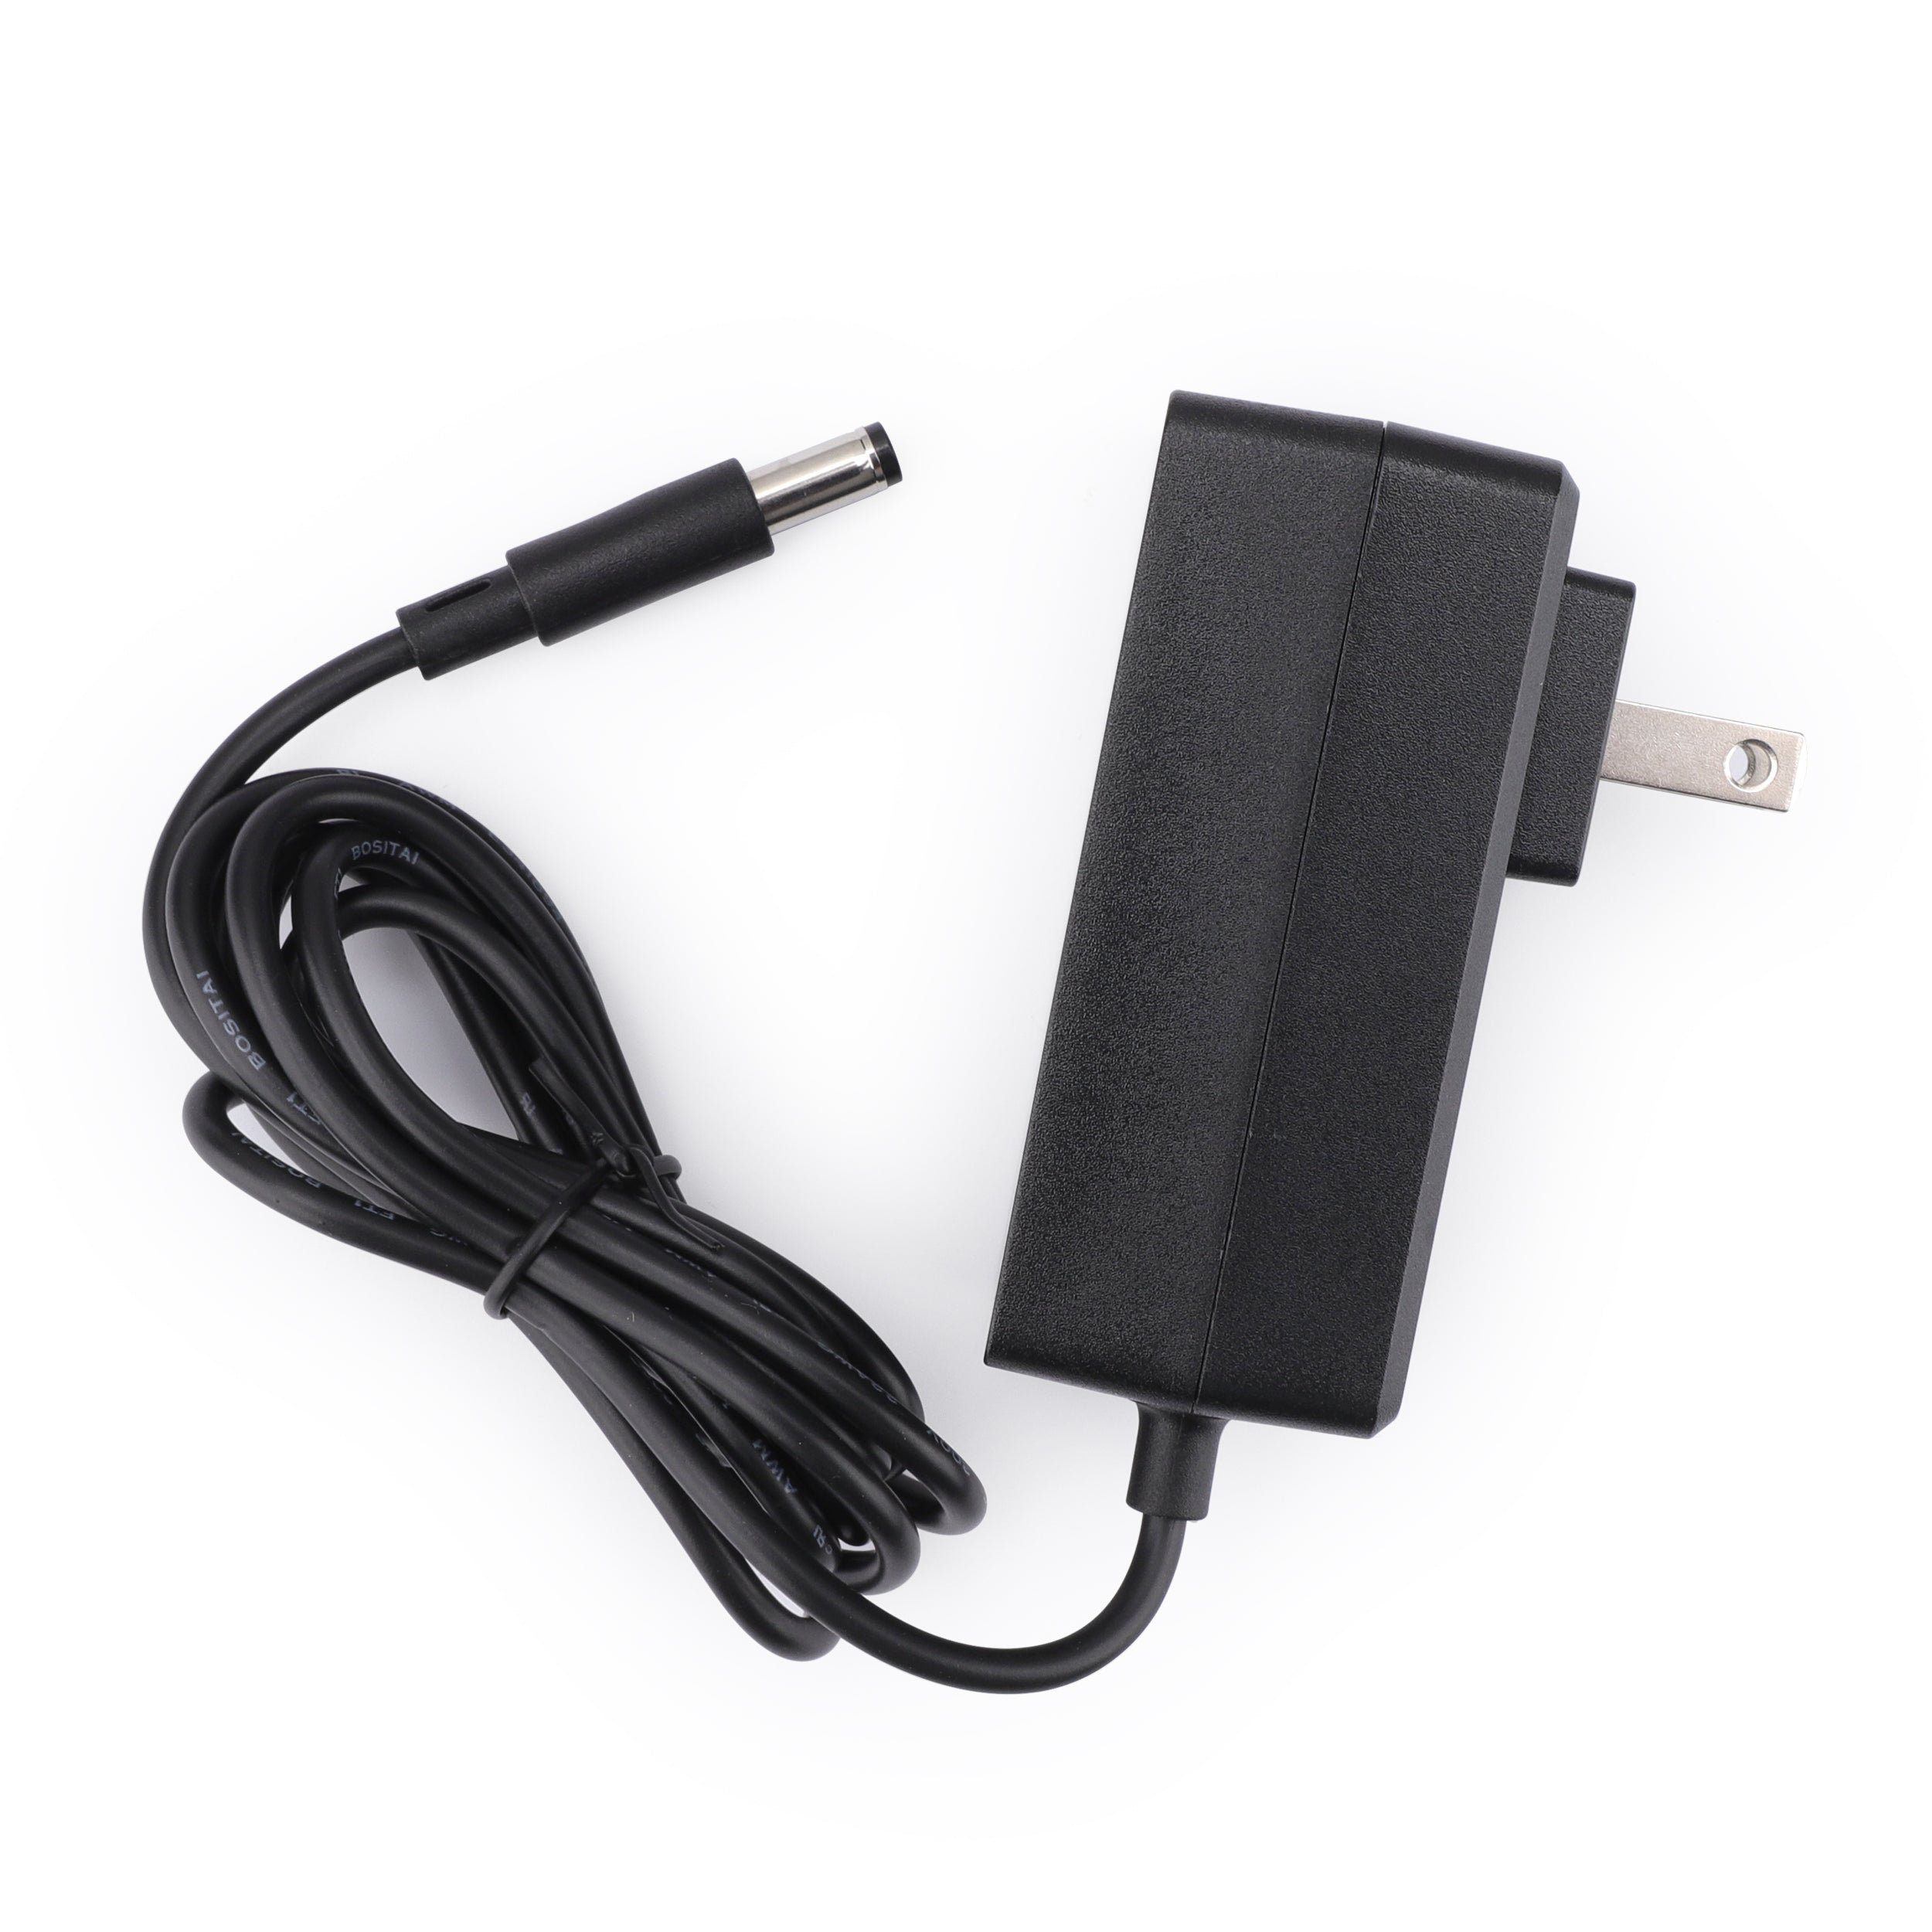 Pwrtech Brand New 12V 2A 5.5x2.5mm Center Positive AC-DC Adapter Charger Power Supply